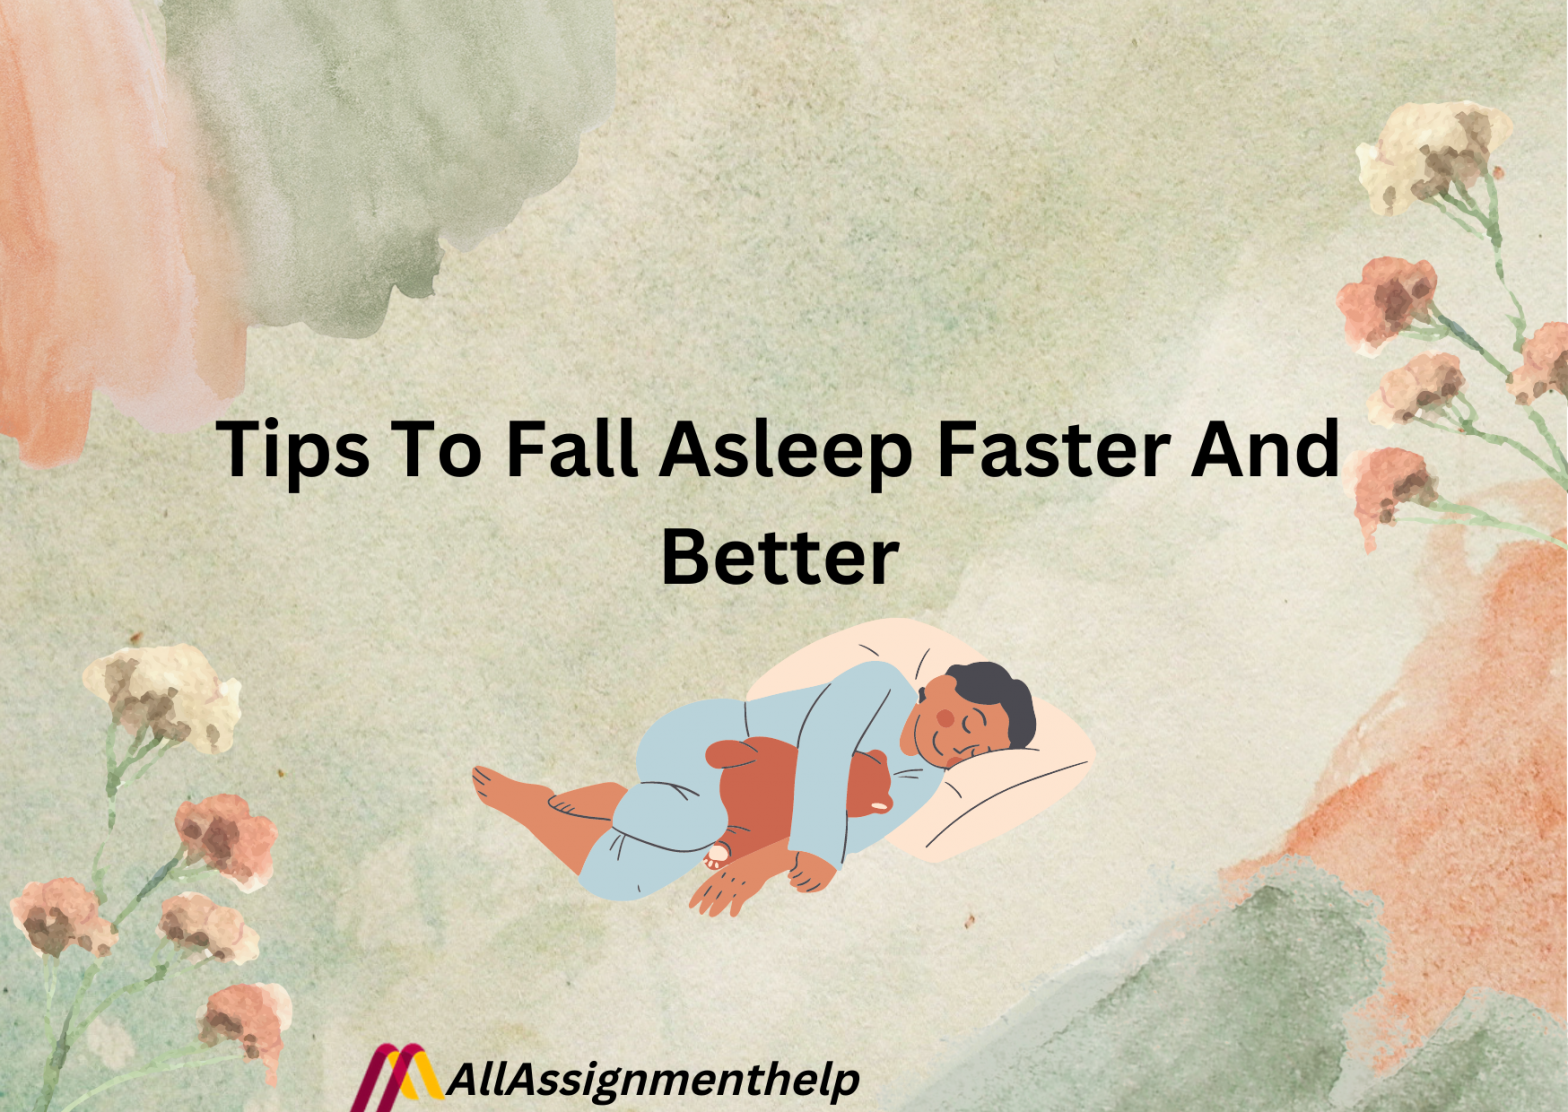 Tips To Fall Asleep Faster And Better